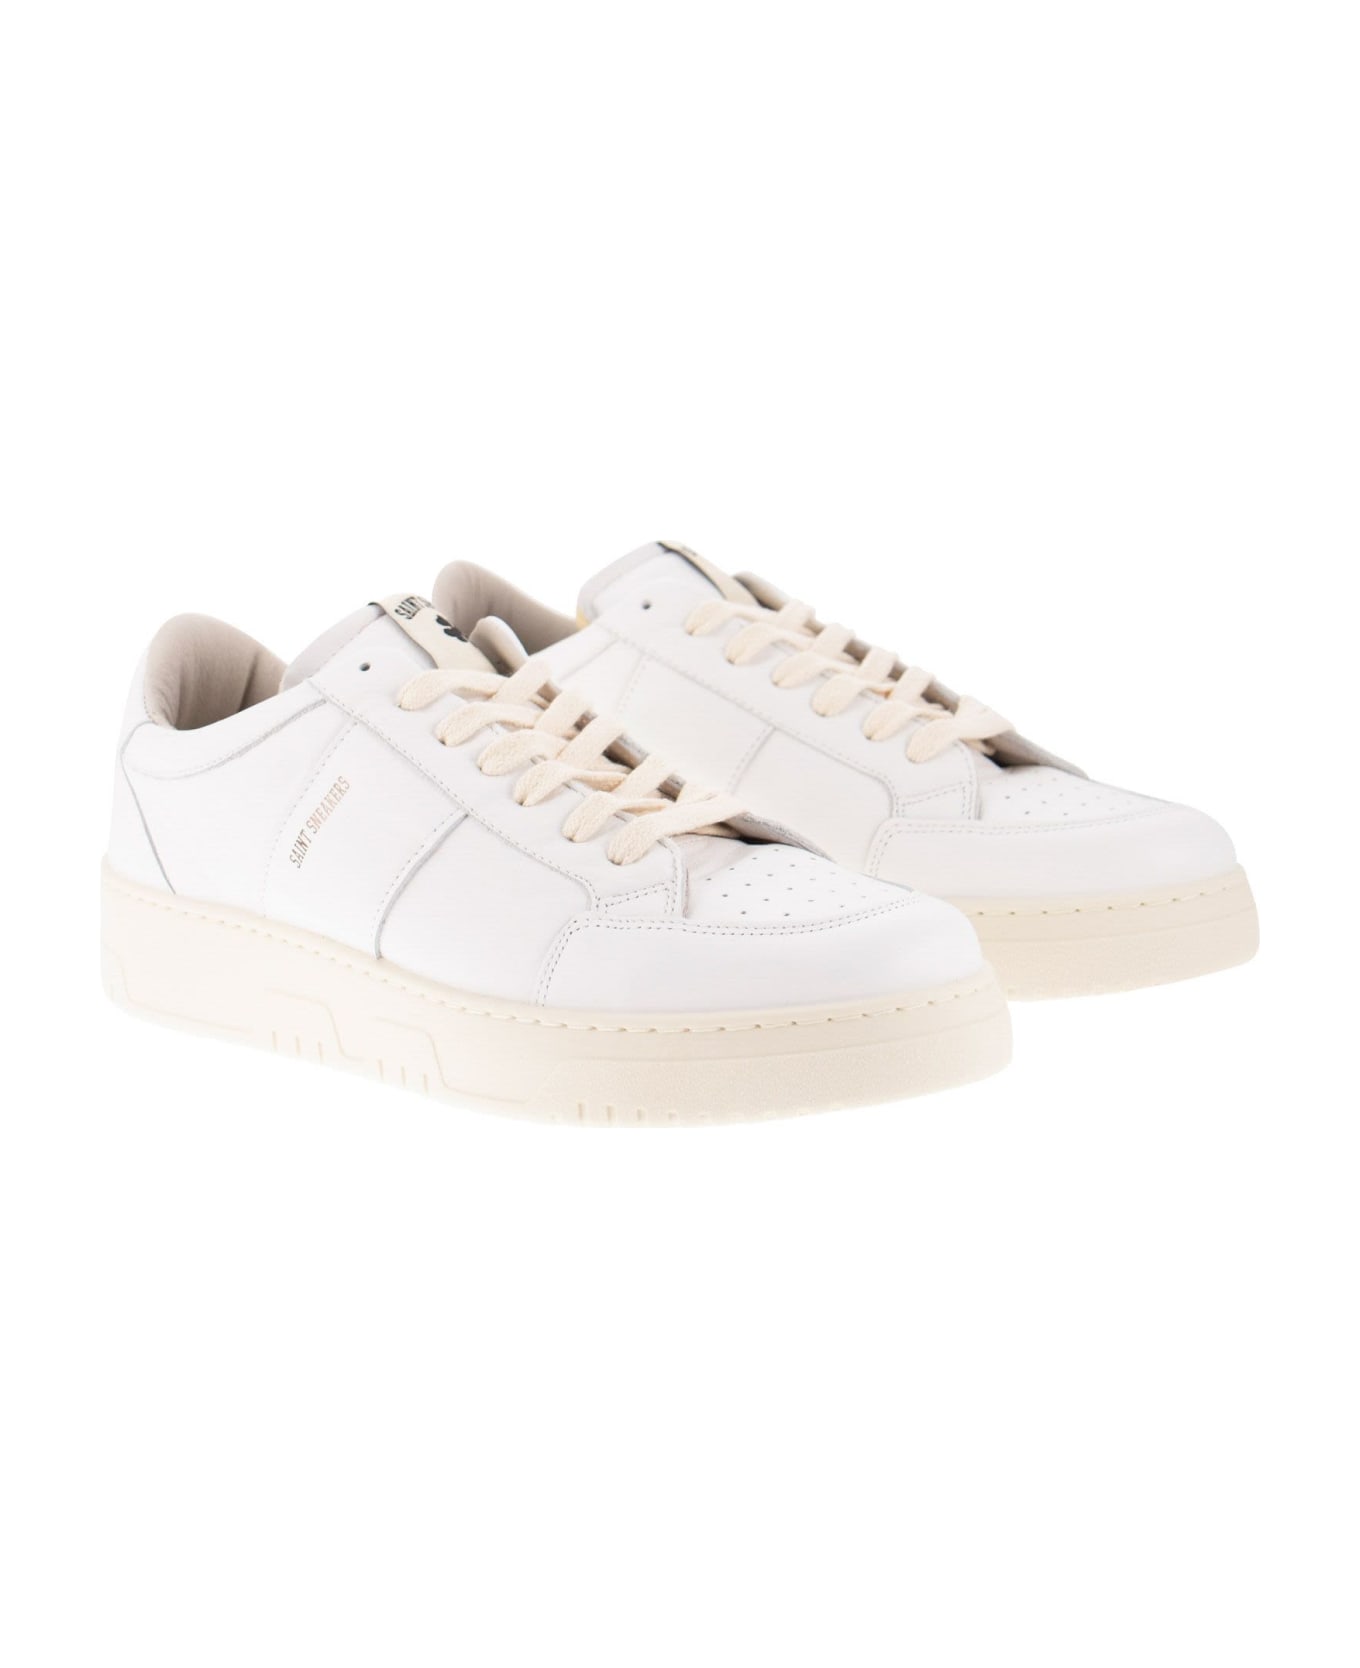 Saint Sneakers Golf - White Trainers - White